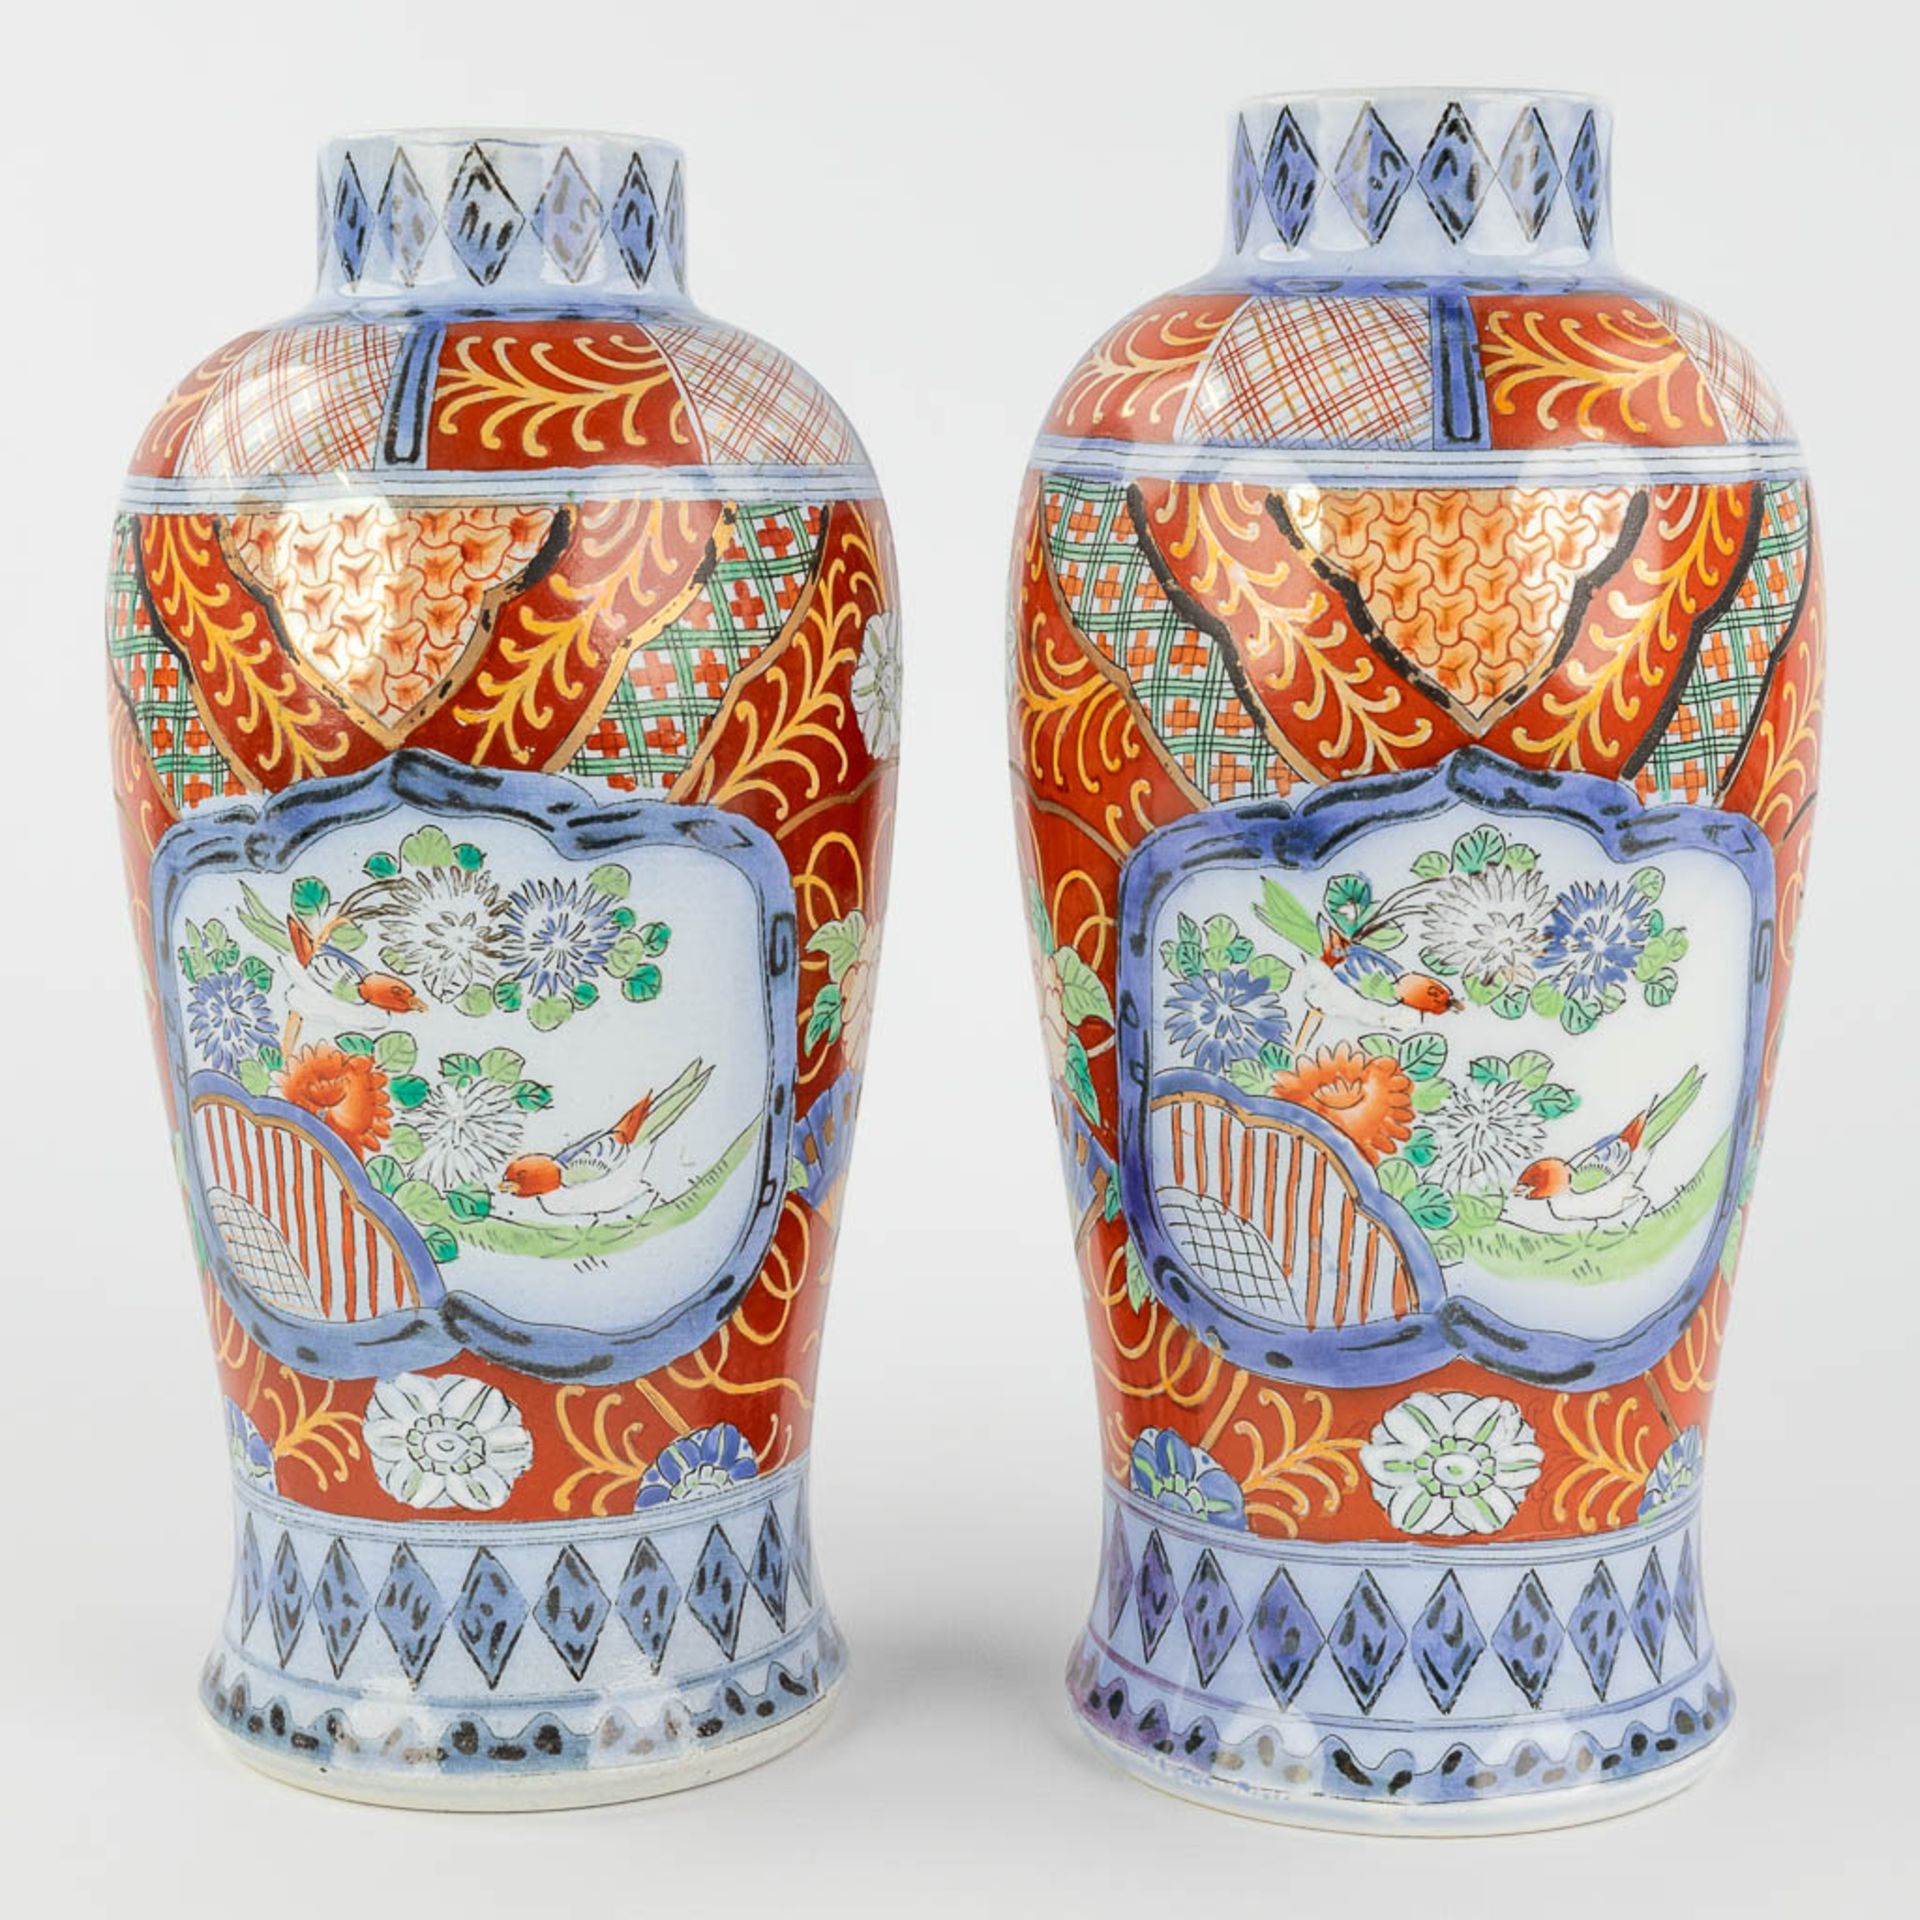 An assembled collection of Japanese Imari and Kutani porcelain. 19th/20th century. (H: 35 x D: 19 cm - Image 3 of 22